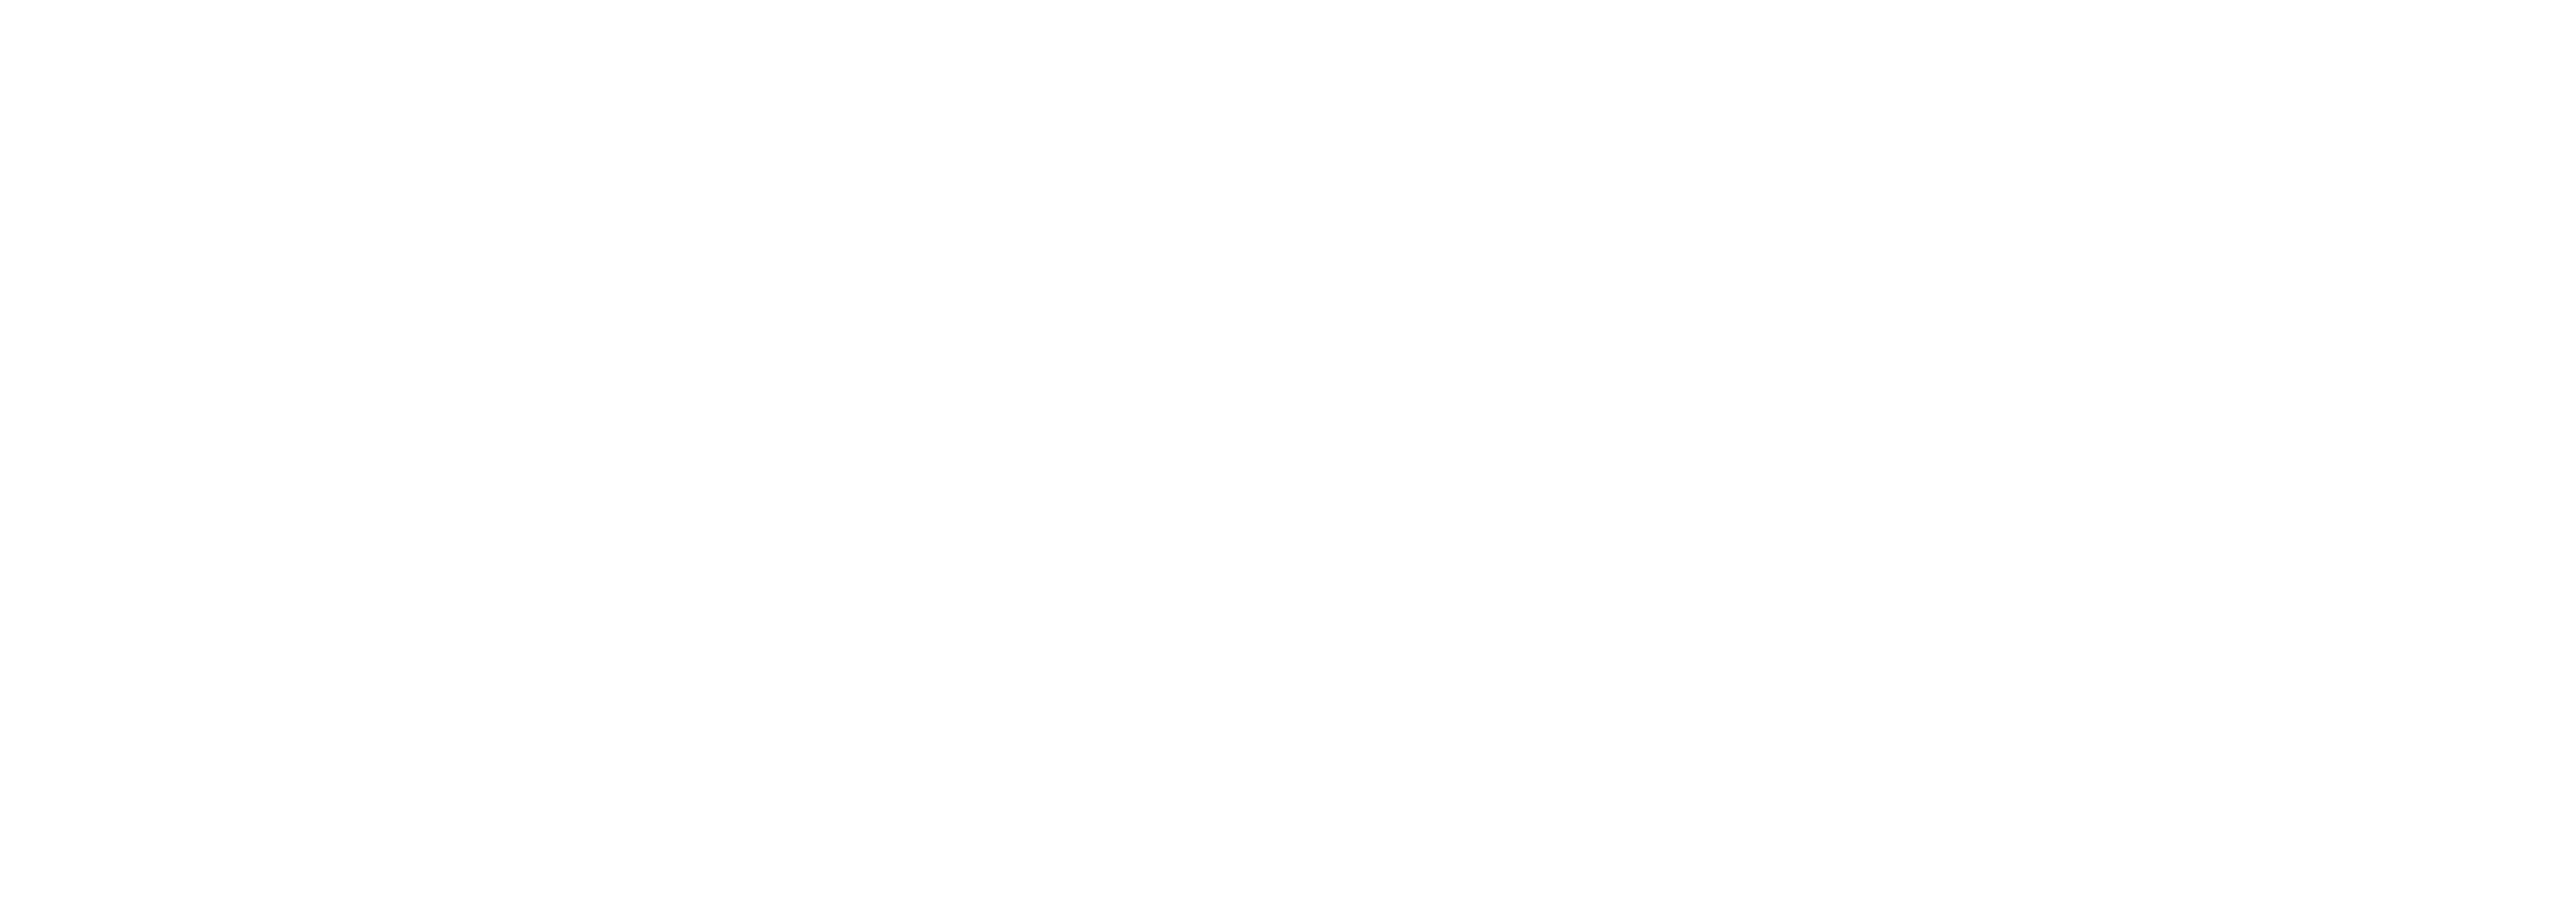 St. Louis Arts Chamber of Commerce - St. Louis Arts Network